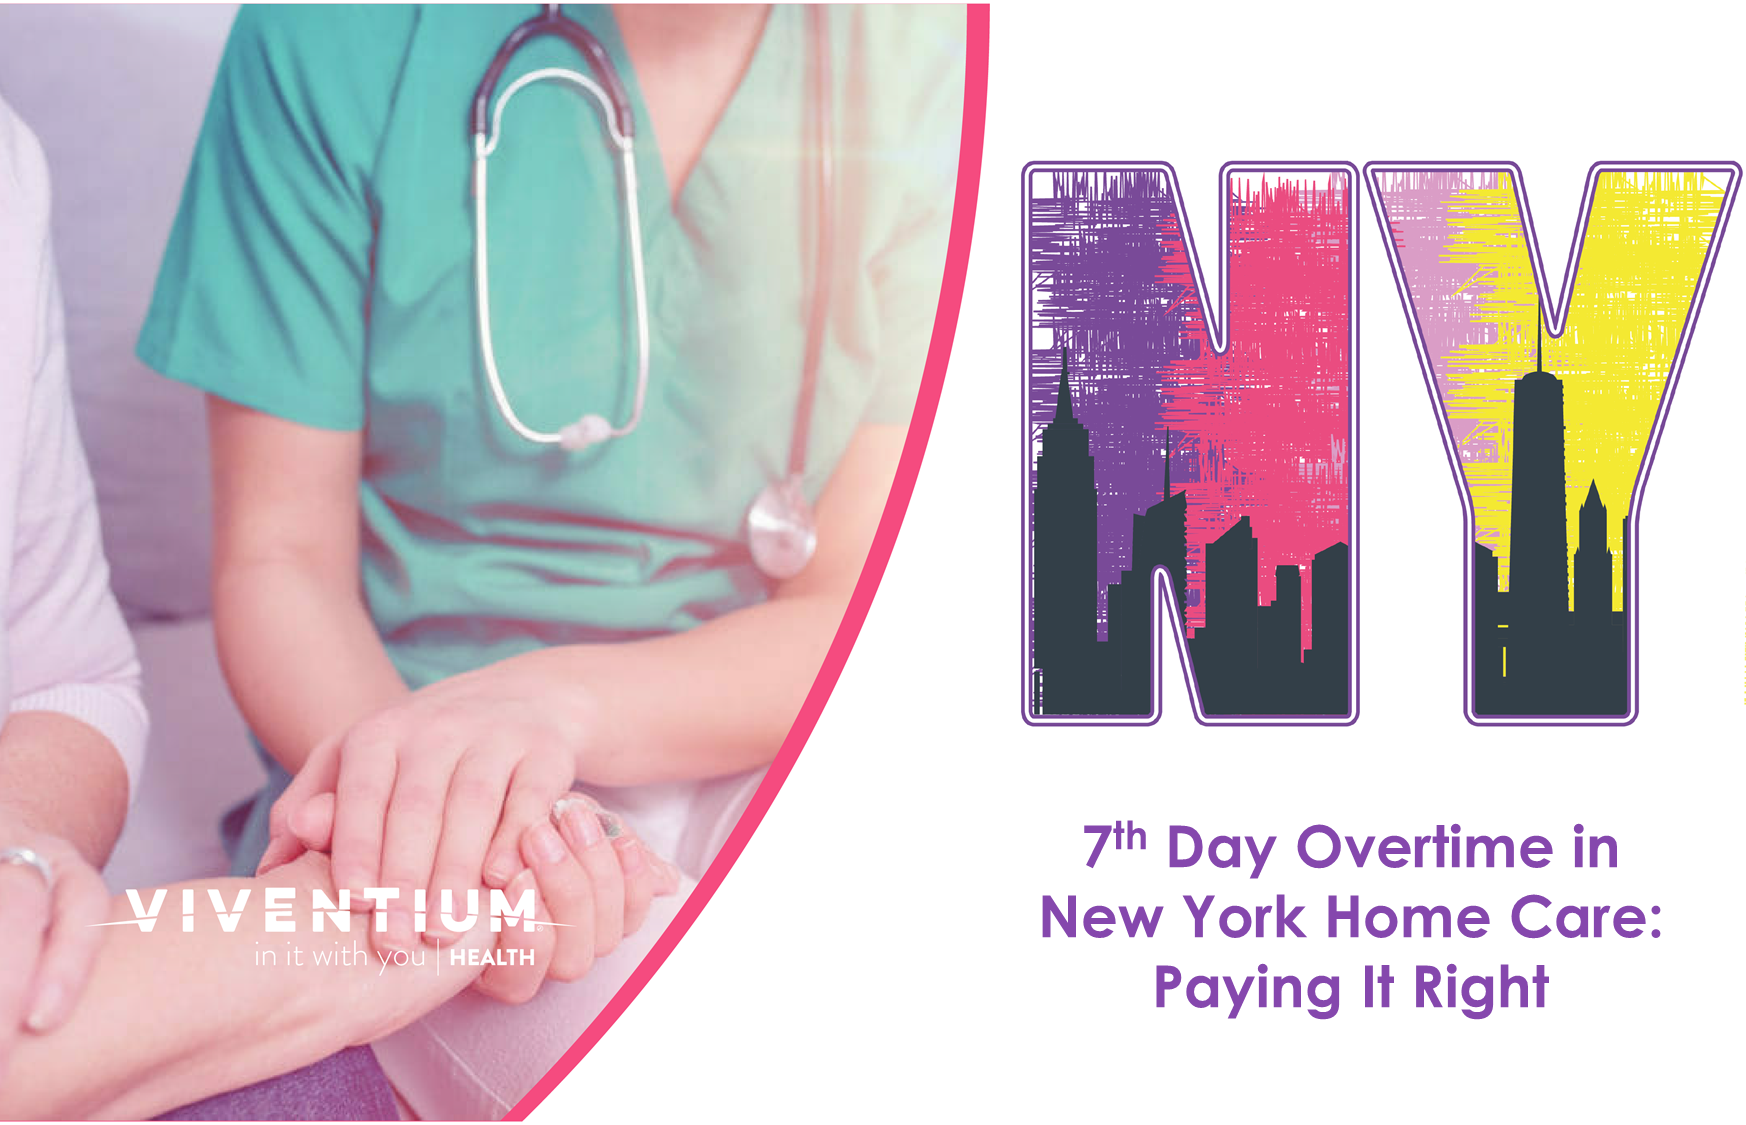 7th Day Overtime in New York Home Care - Paying It Right Image-1